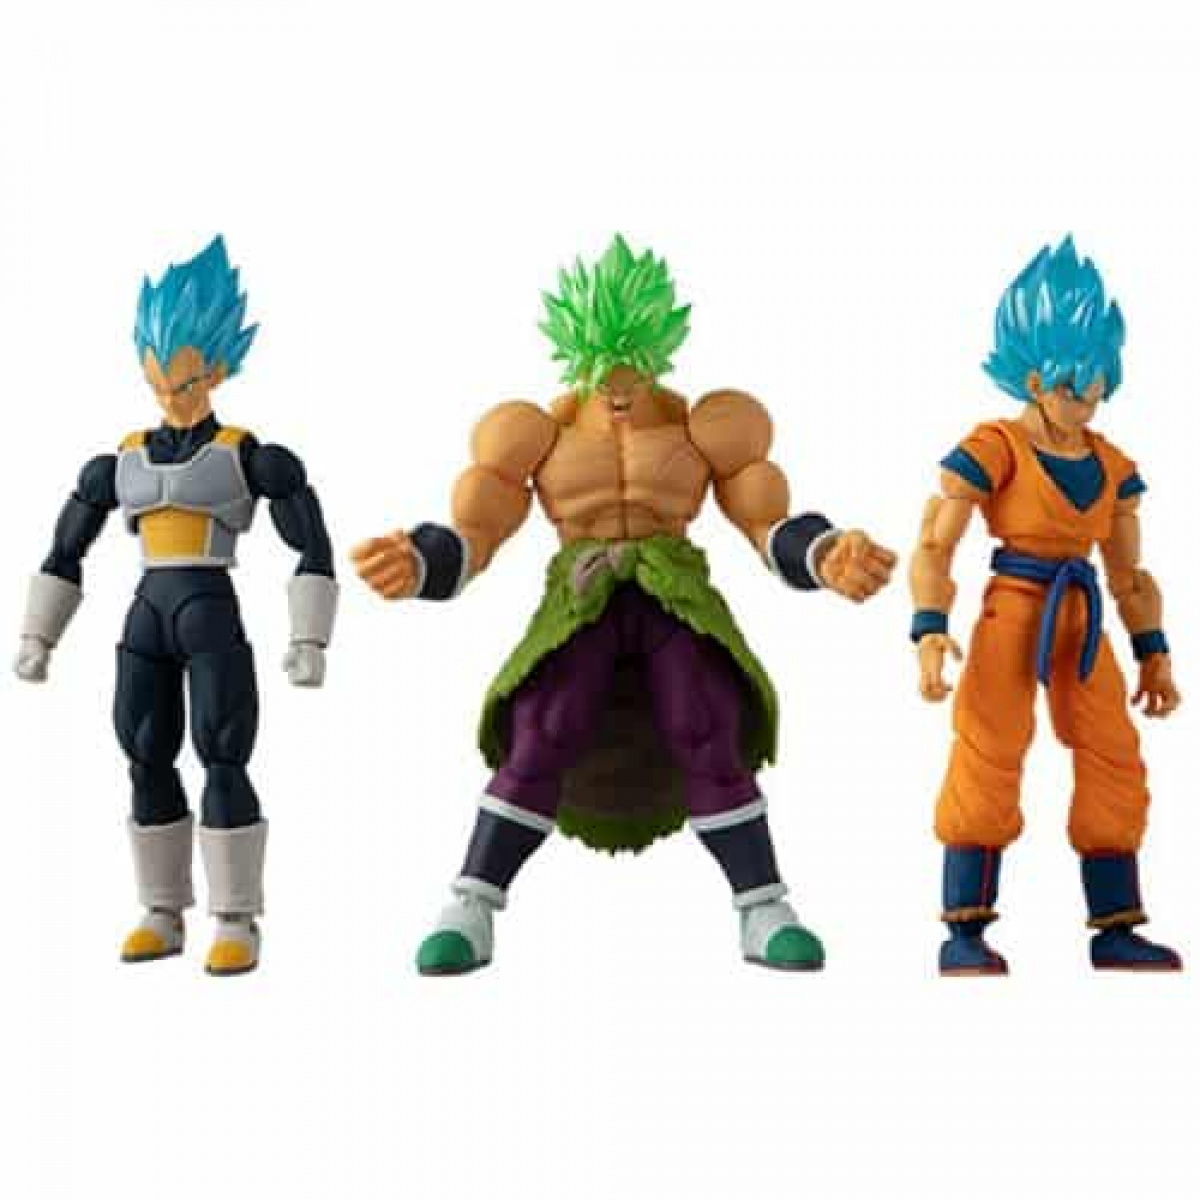 Dragon Ball Super 5-Inch Action Figure Wave 1 Figures